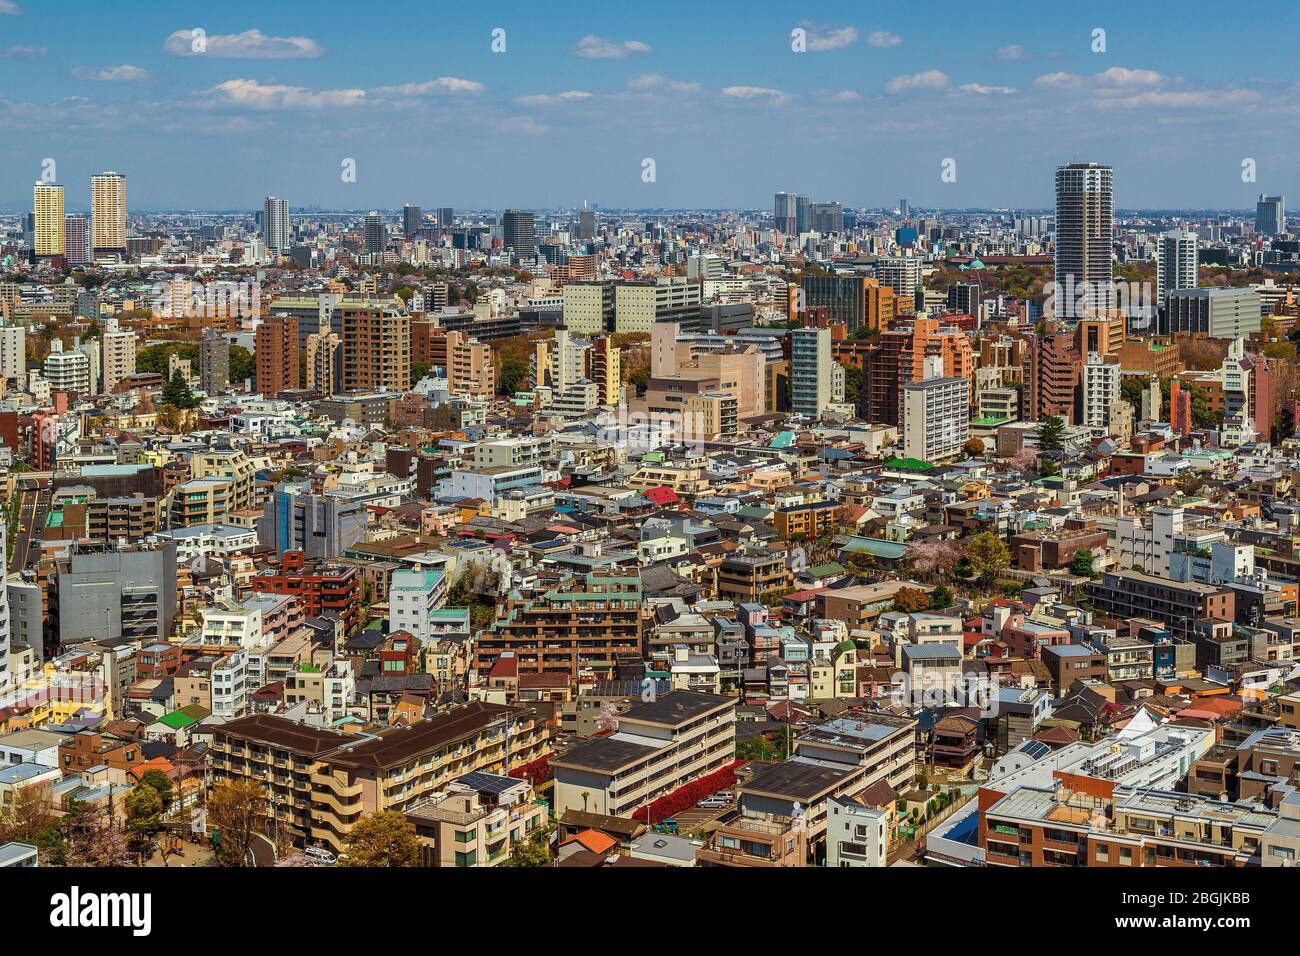 Tokyo endless suburbs, a wall of concrete buildings view from above Stock Photo